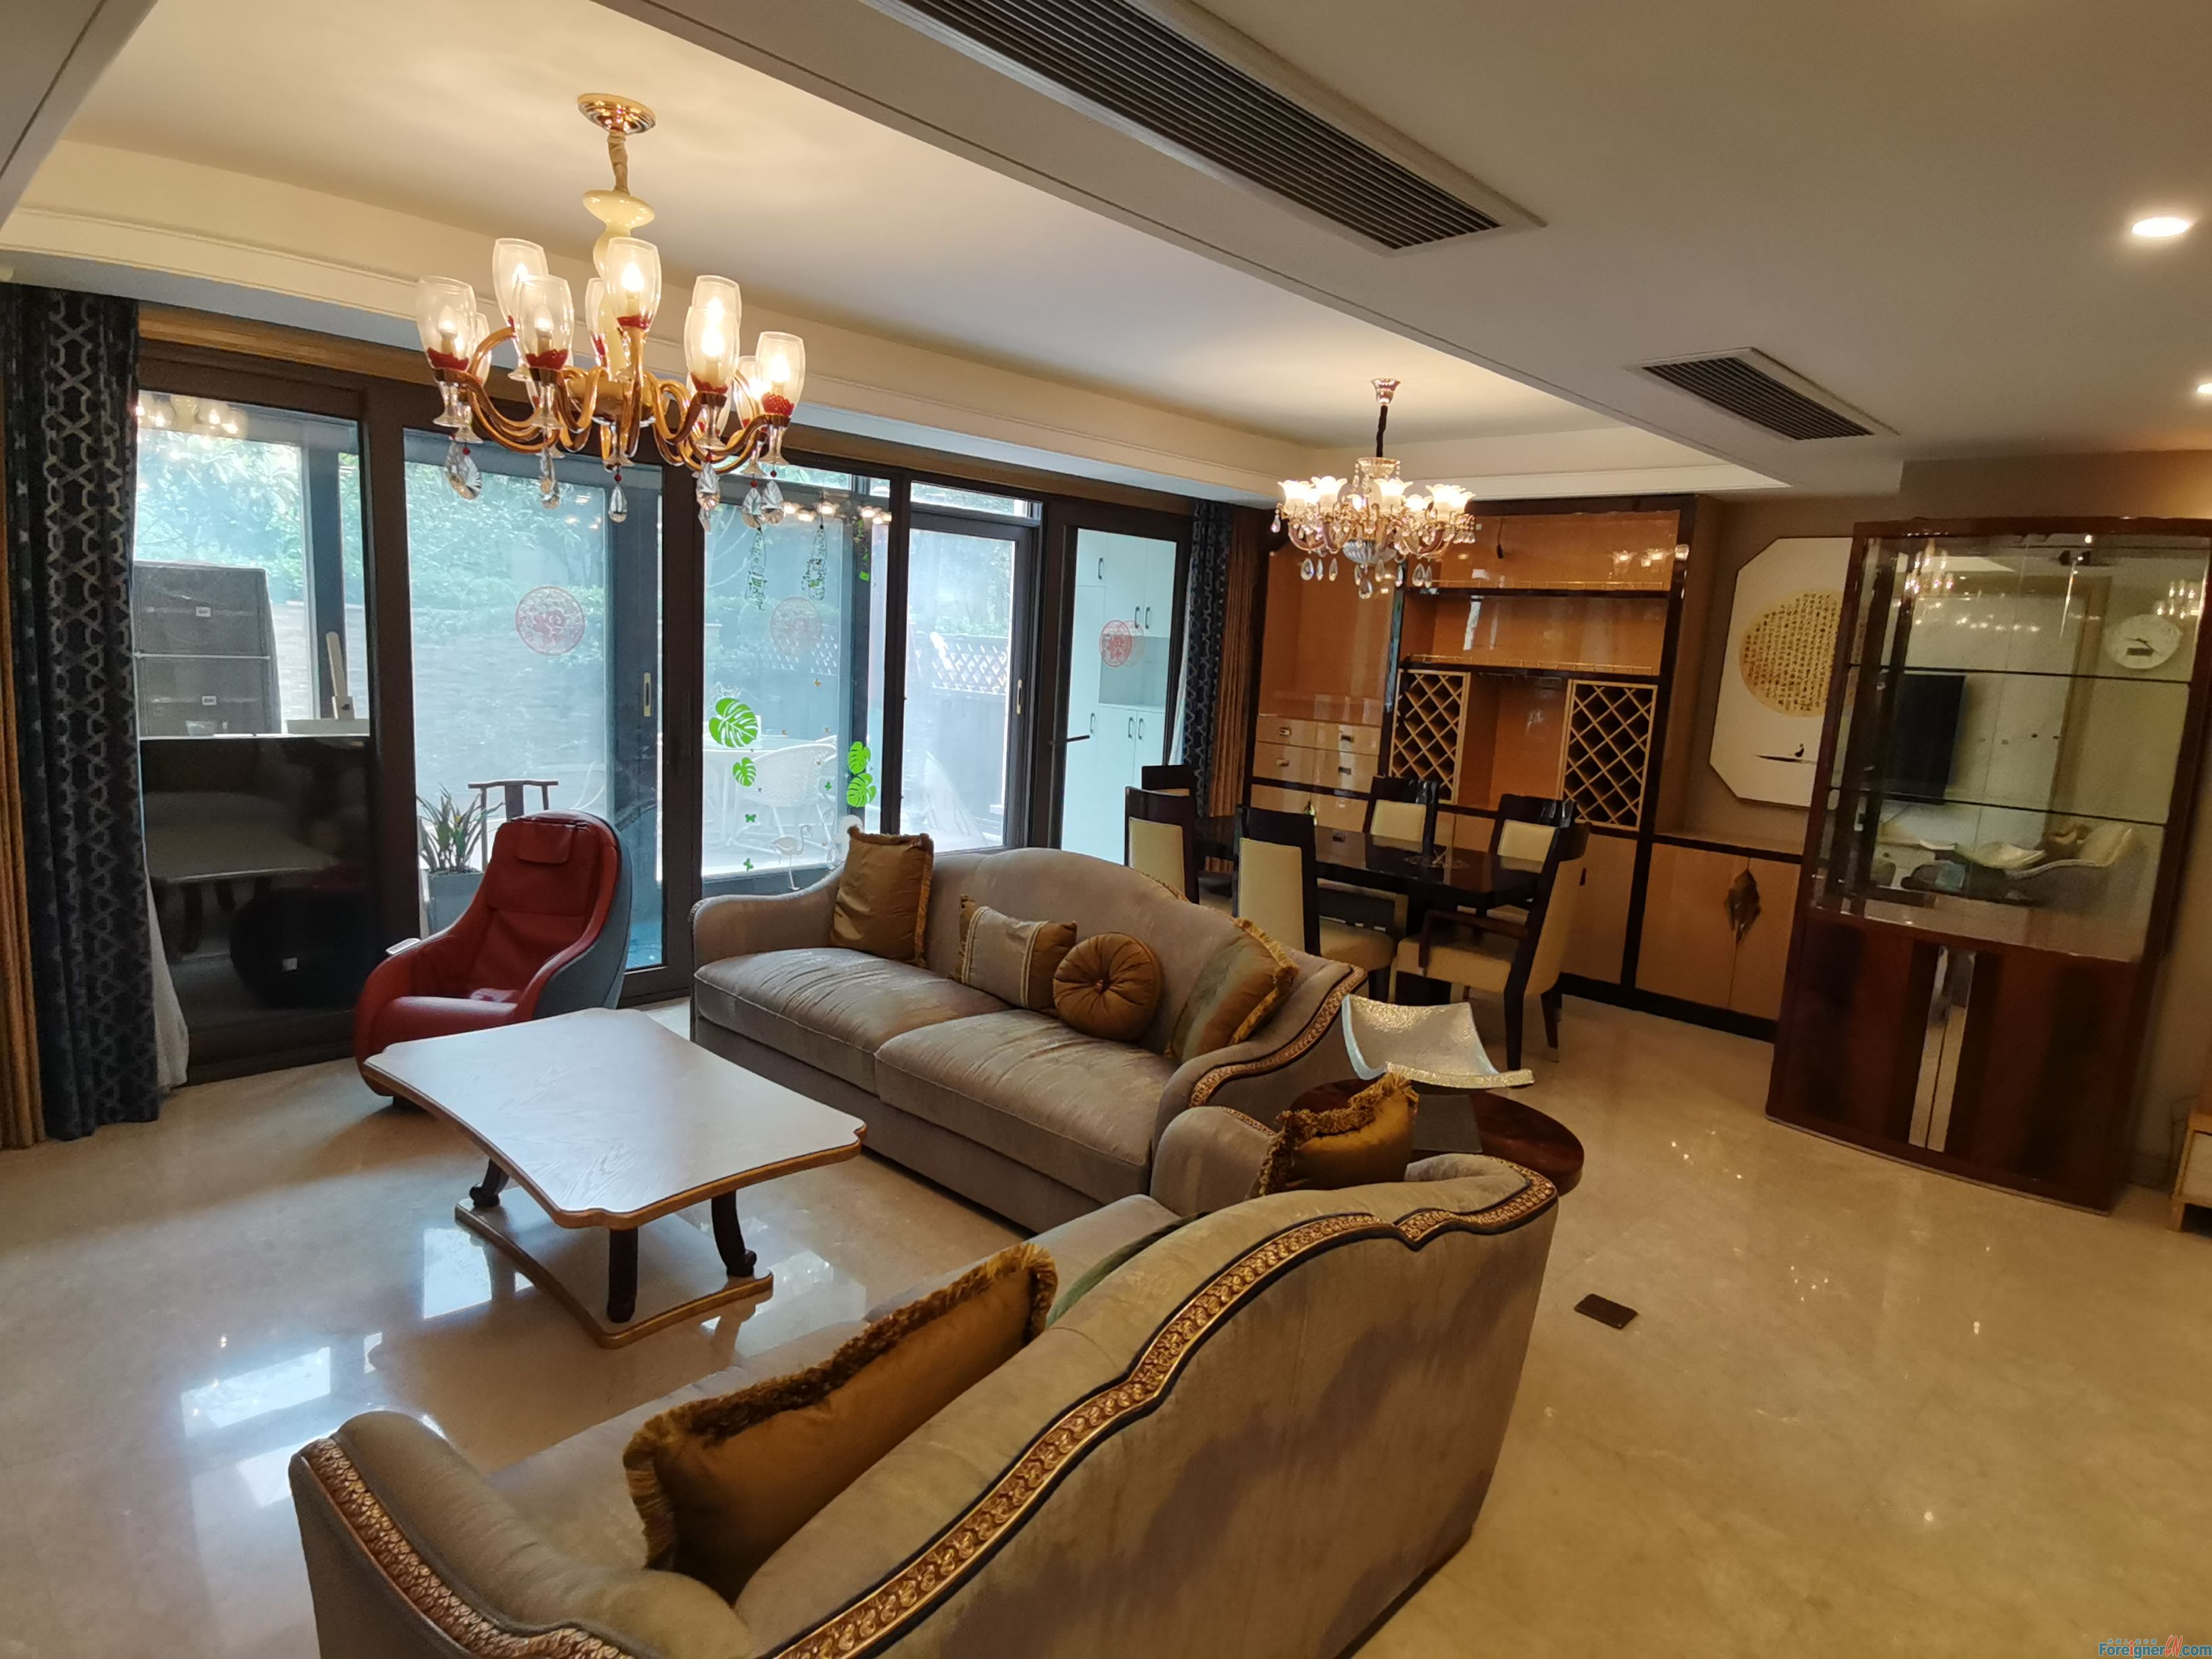 Wonderful!!! Big and pretty garden Flat rent for expats/4 bedrooms and 2 bathrooms/lots of light/Central AC and floor heating/Luxurious furniture/Jinji lake